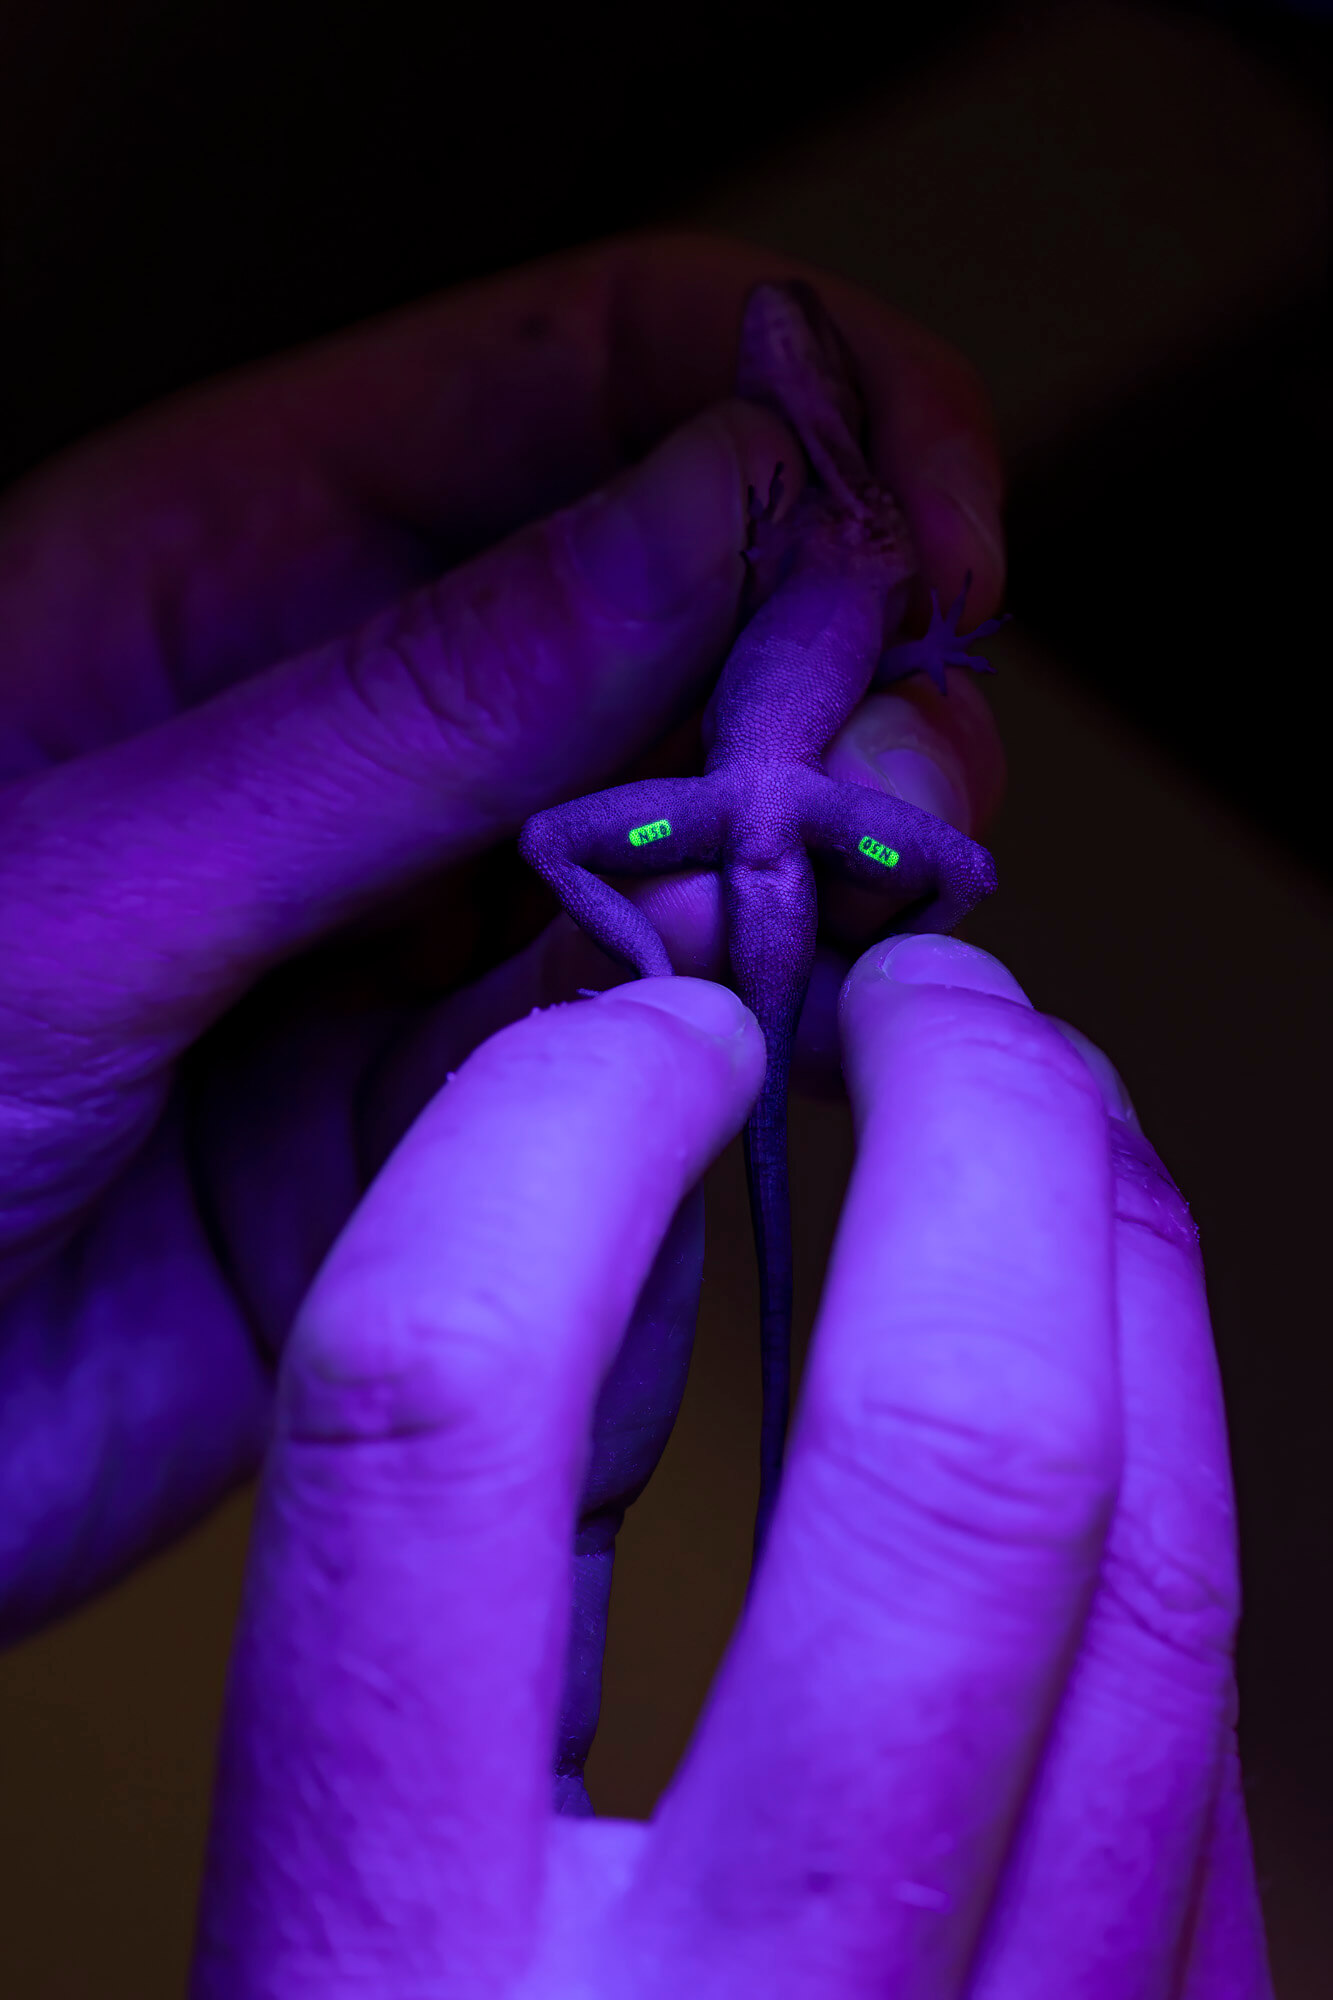 Researchers identified the lizards by harmless blacklight tags that they implanted under the skin of their legs.